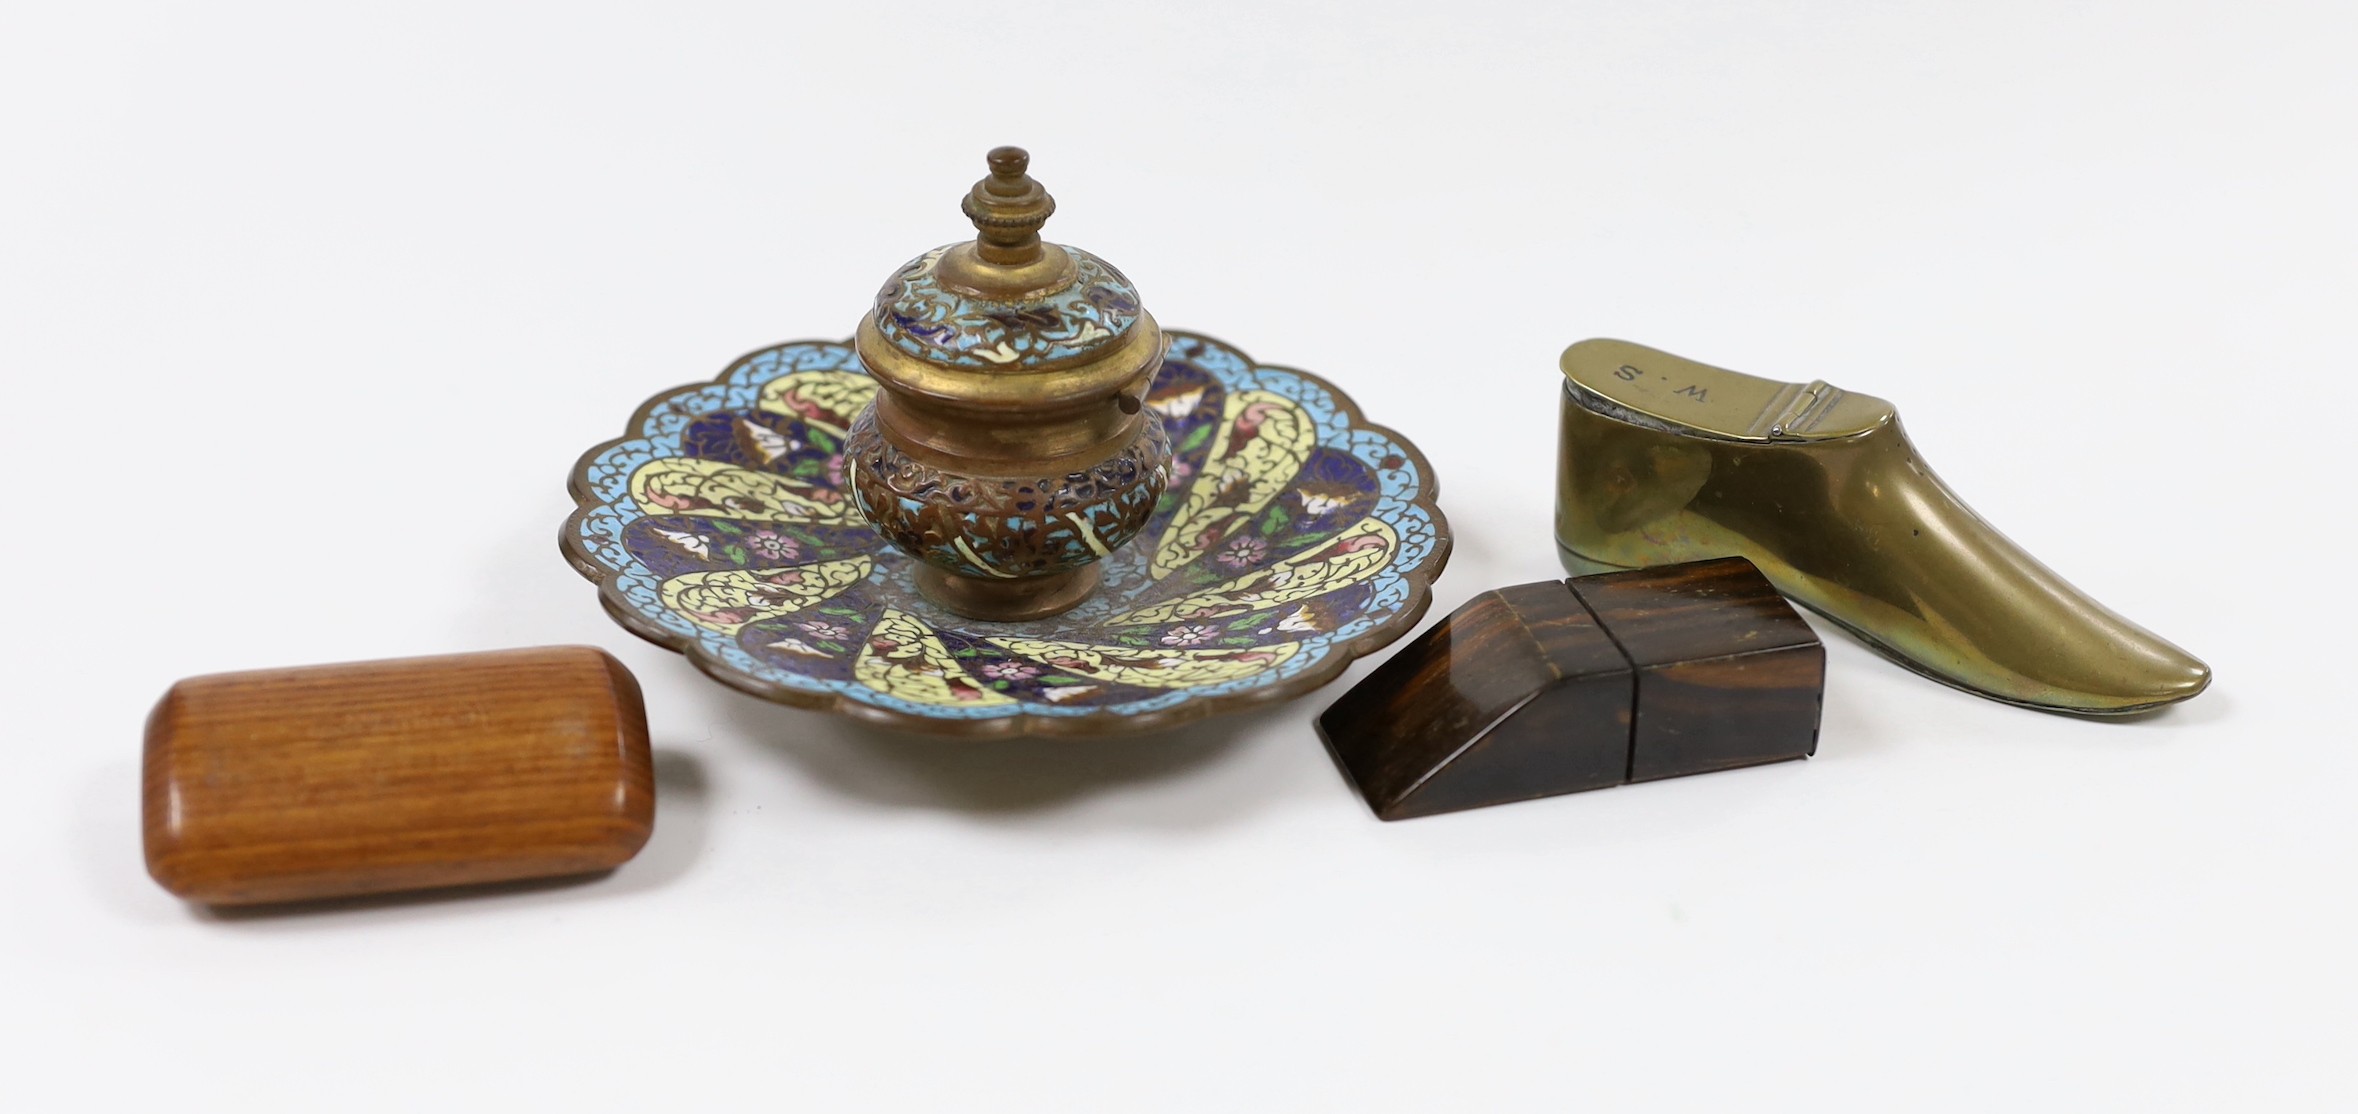 A 19th century French champleve enamel inkstand, 8.5cm tall, a brass snuff boot and two wood snuff boxes